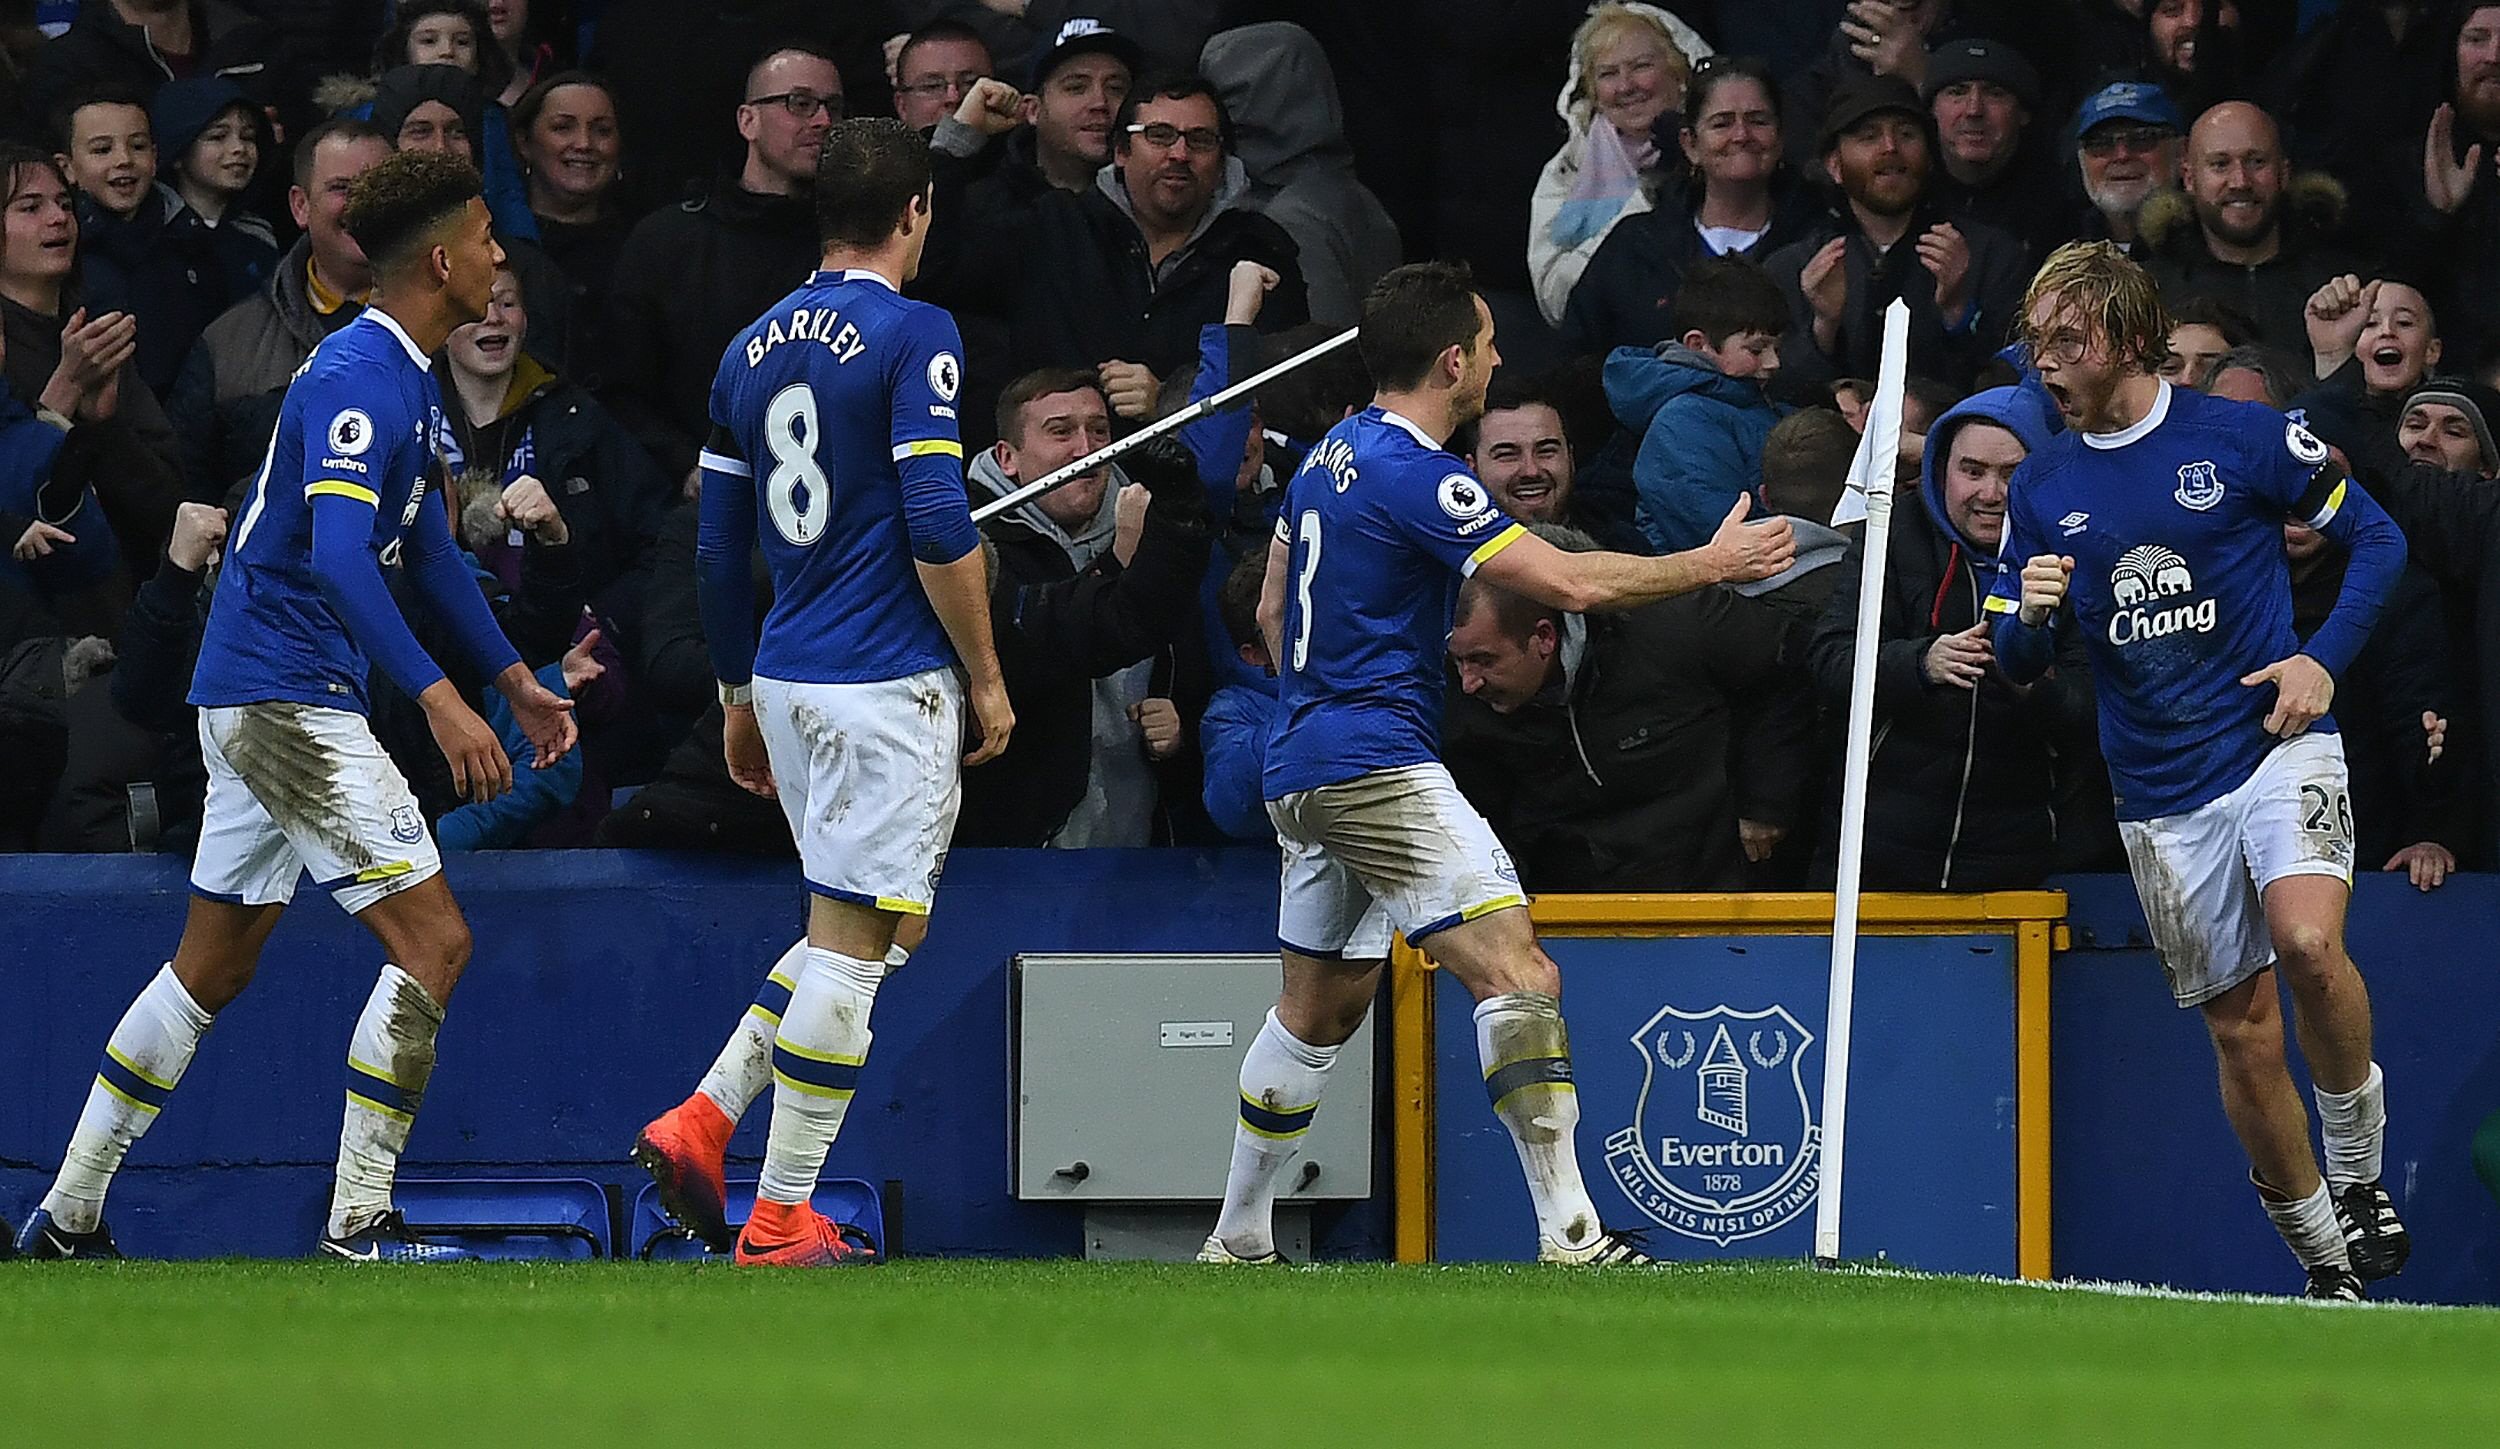 everton 039 s english midfielder tom davies r celebrates with teammates after scoring their third goal during the english premier league football match between everton and manchester city at goodison park in liverpool north west england on january 15 2017 photo afp